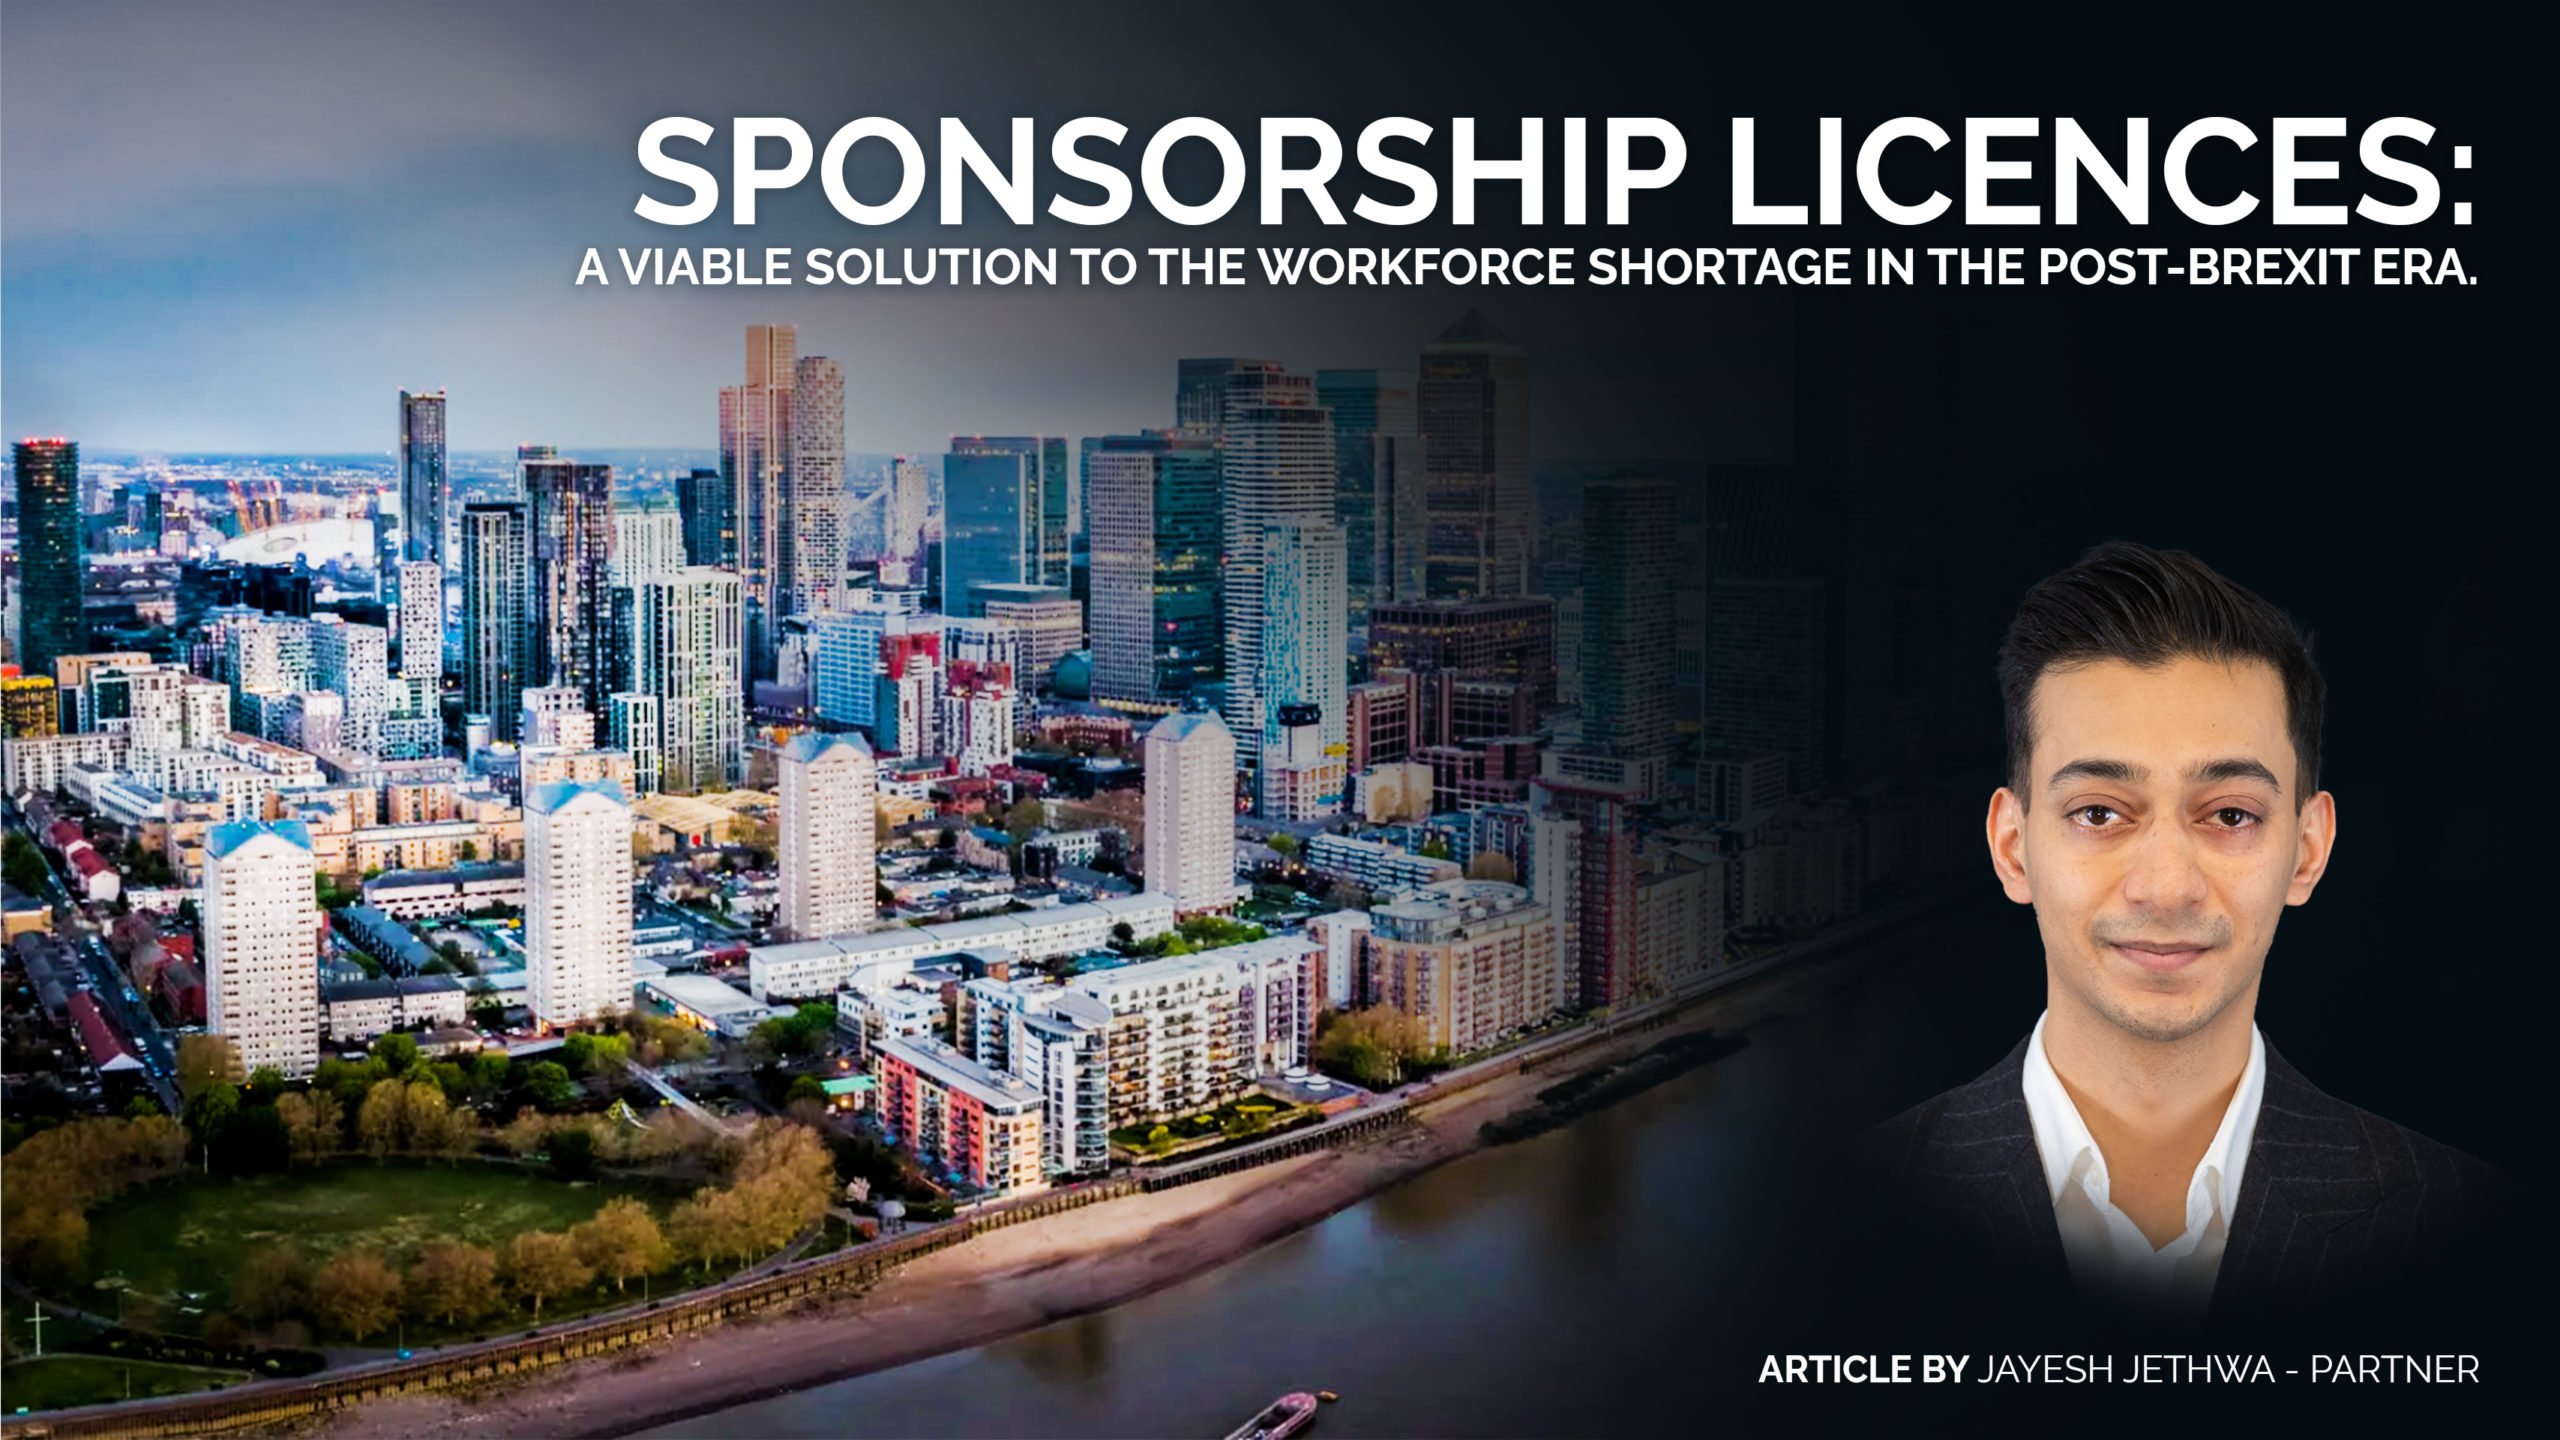 Sponsorship Licences: a viable solution to the workforce shortage in the post-Brexit era.